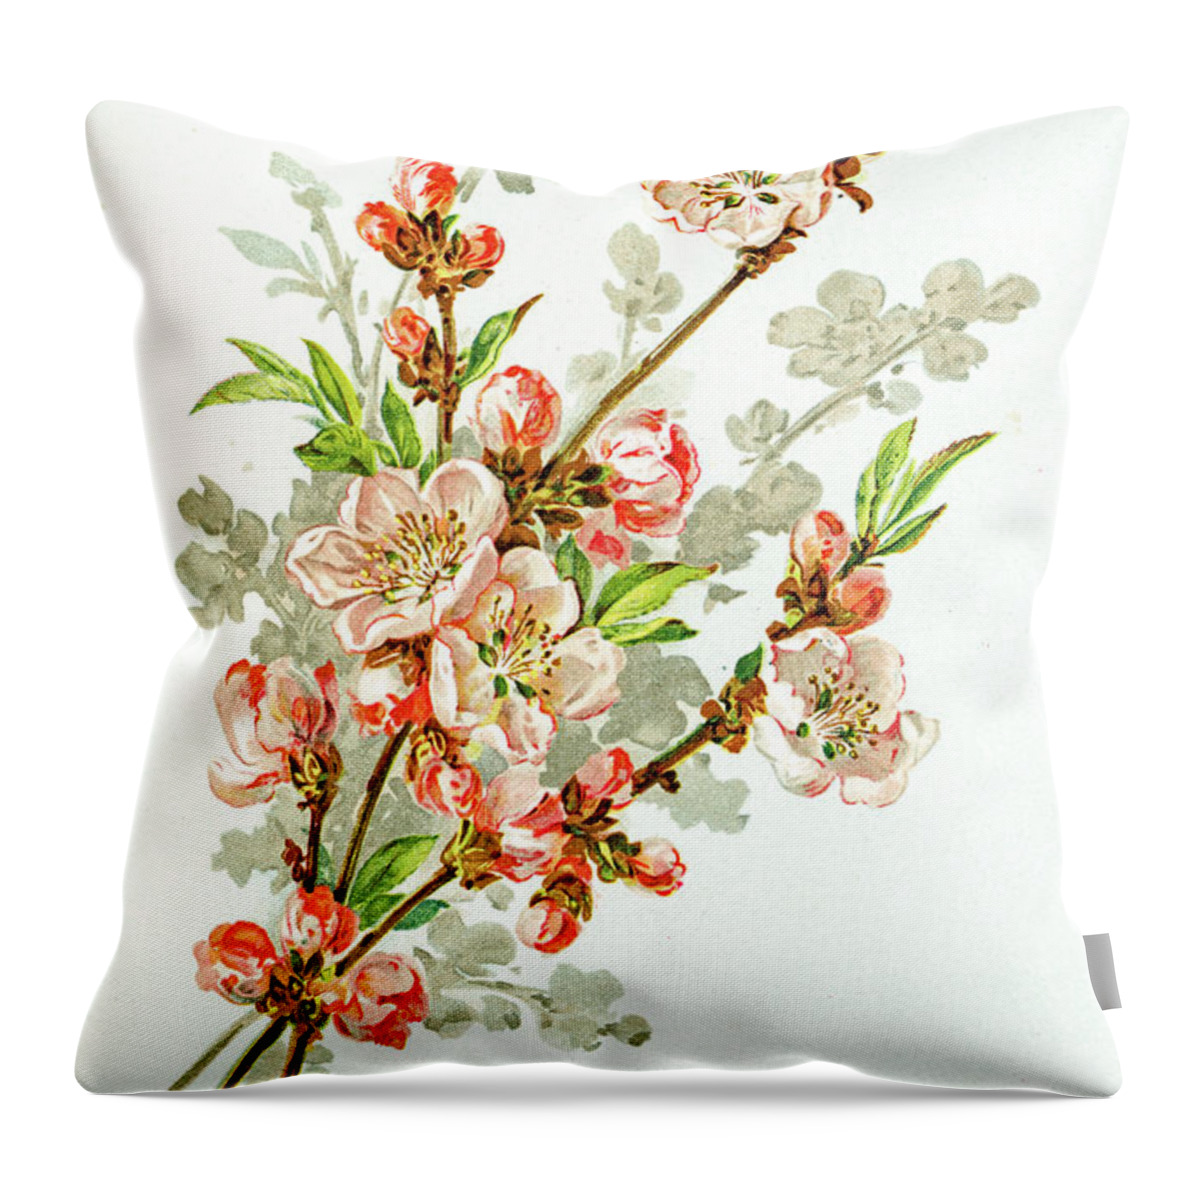 Cherry Throw Pillow featuring the digital art Apple Blossom 19 Century Illustration #1 by Mashuk